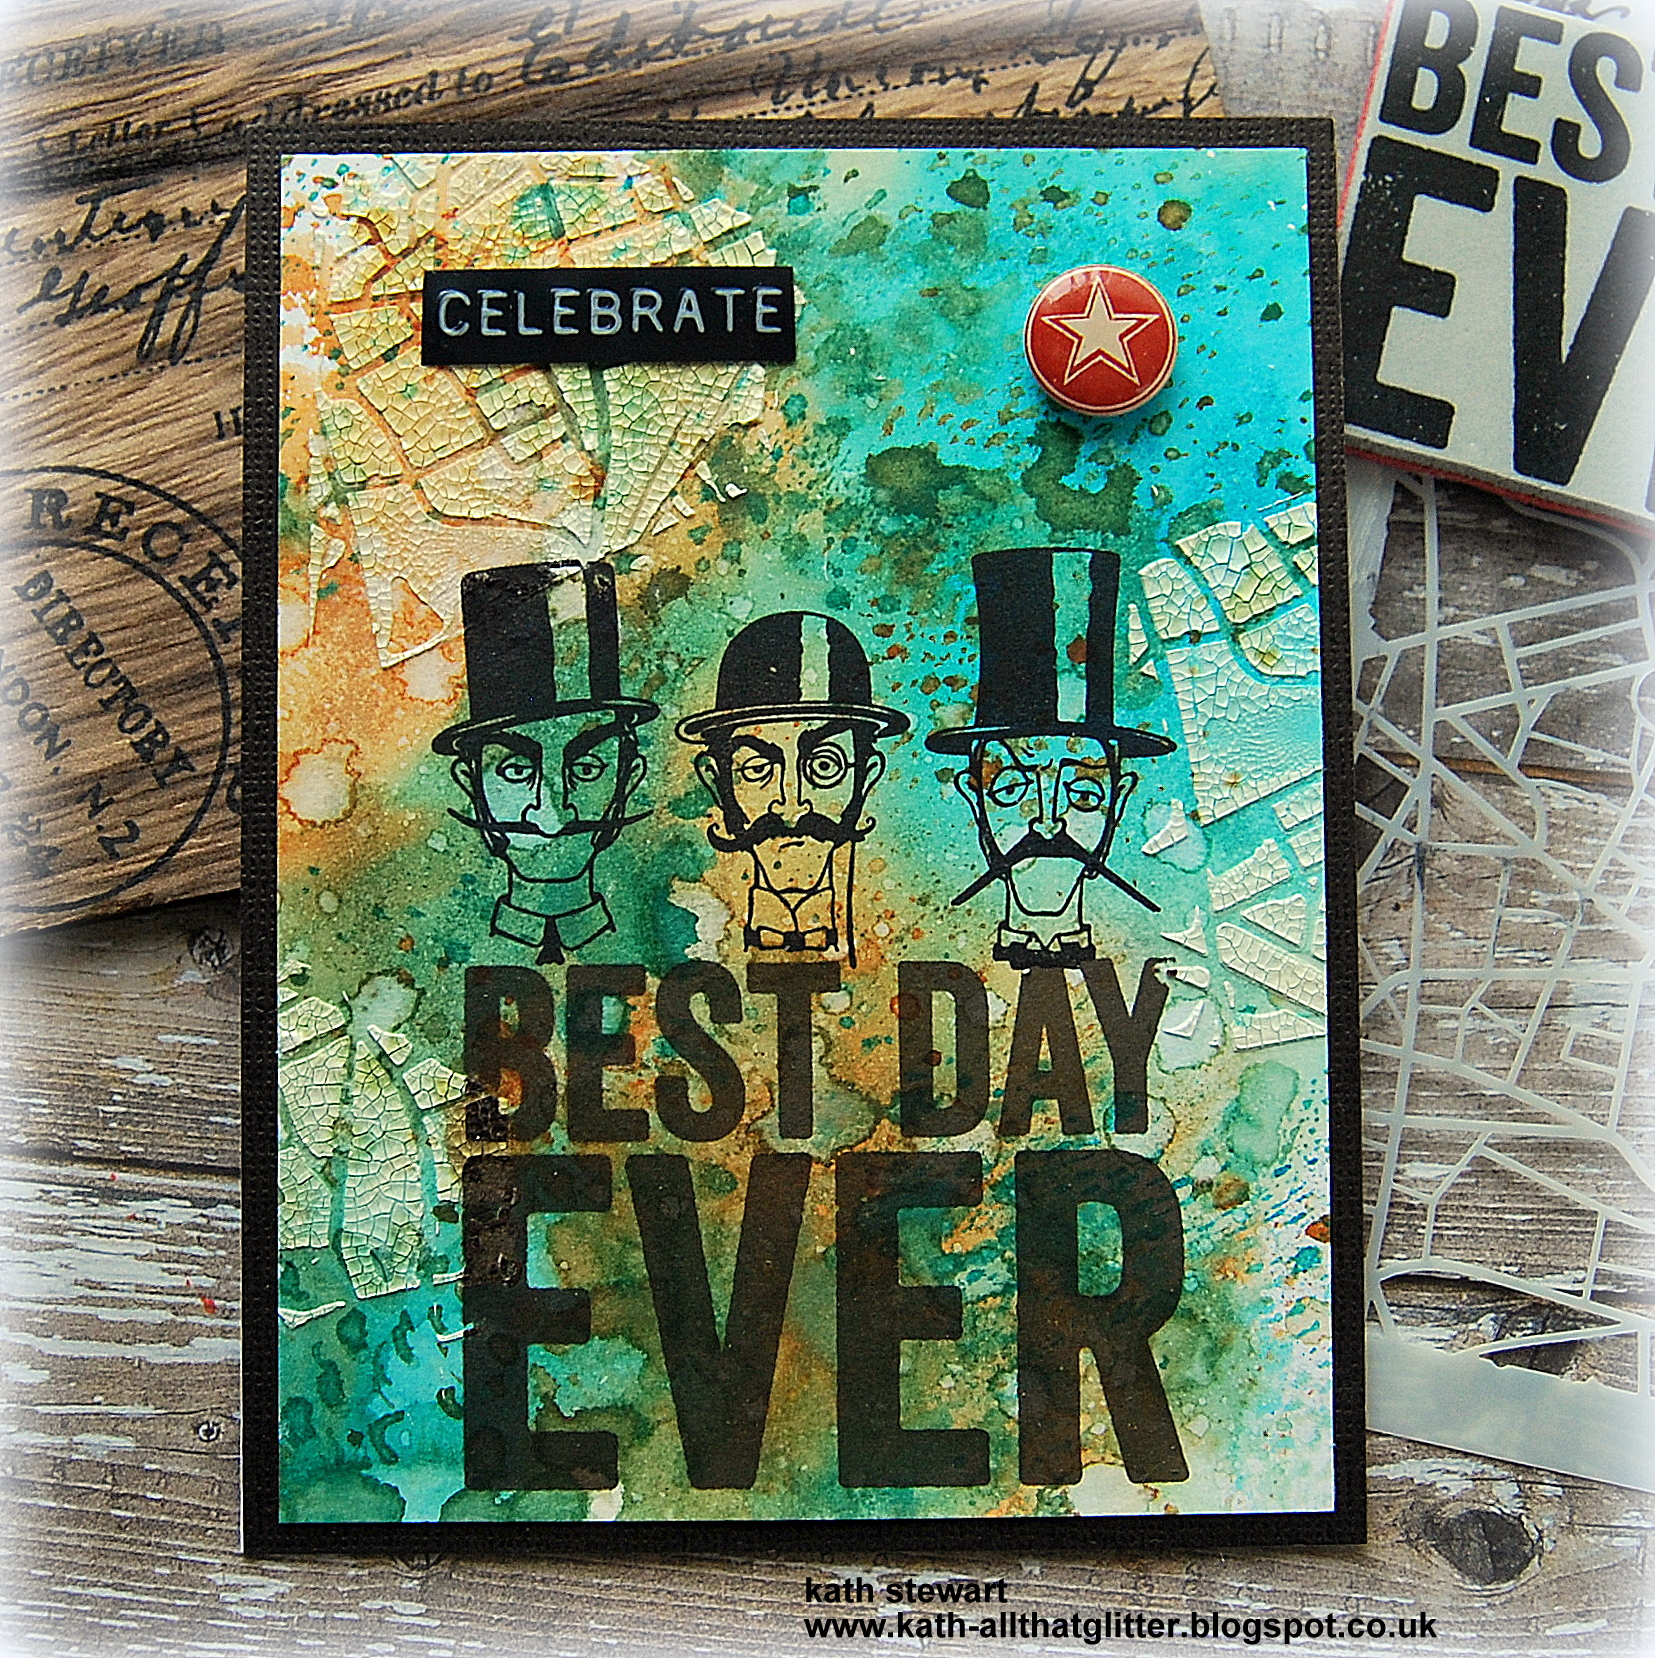 New Tim Holtz Stamps & Stencils from Stampers Anonymous